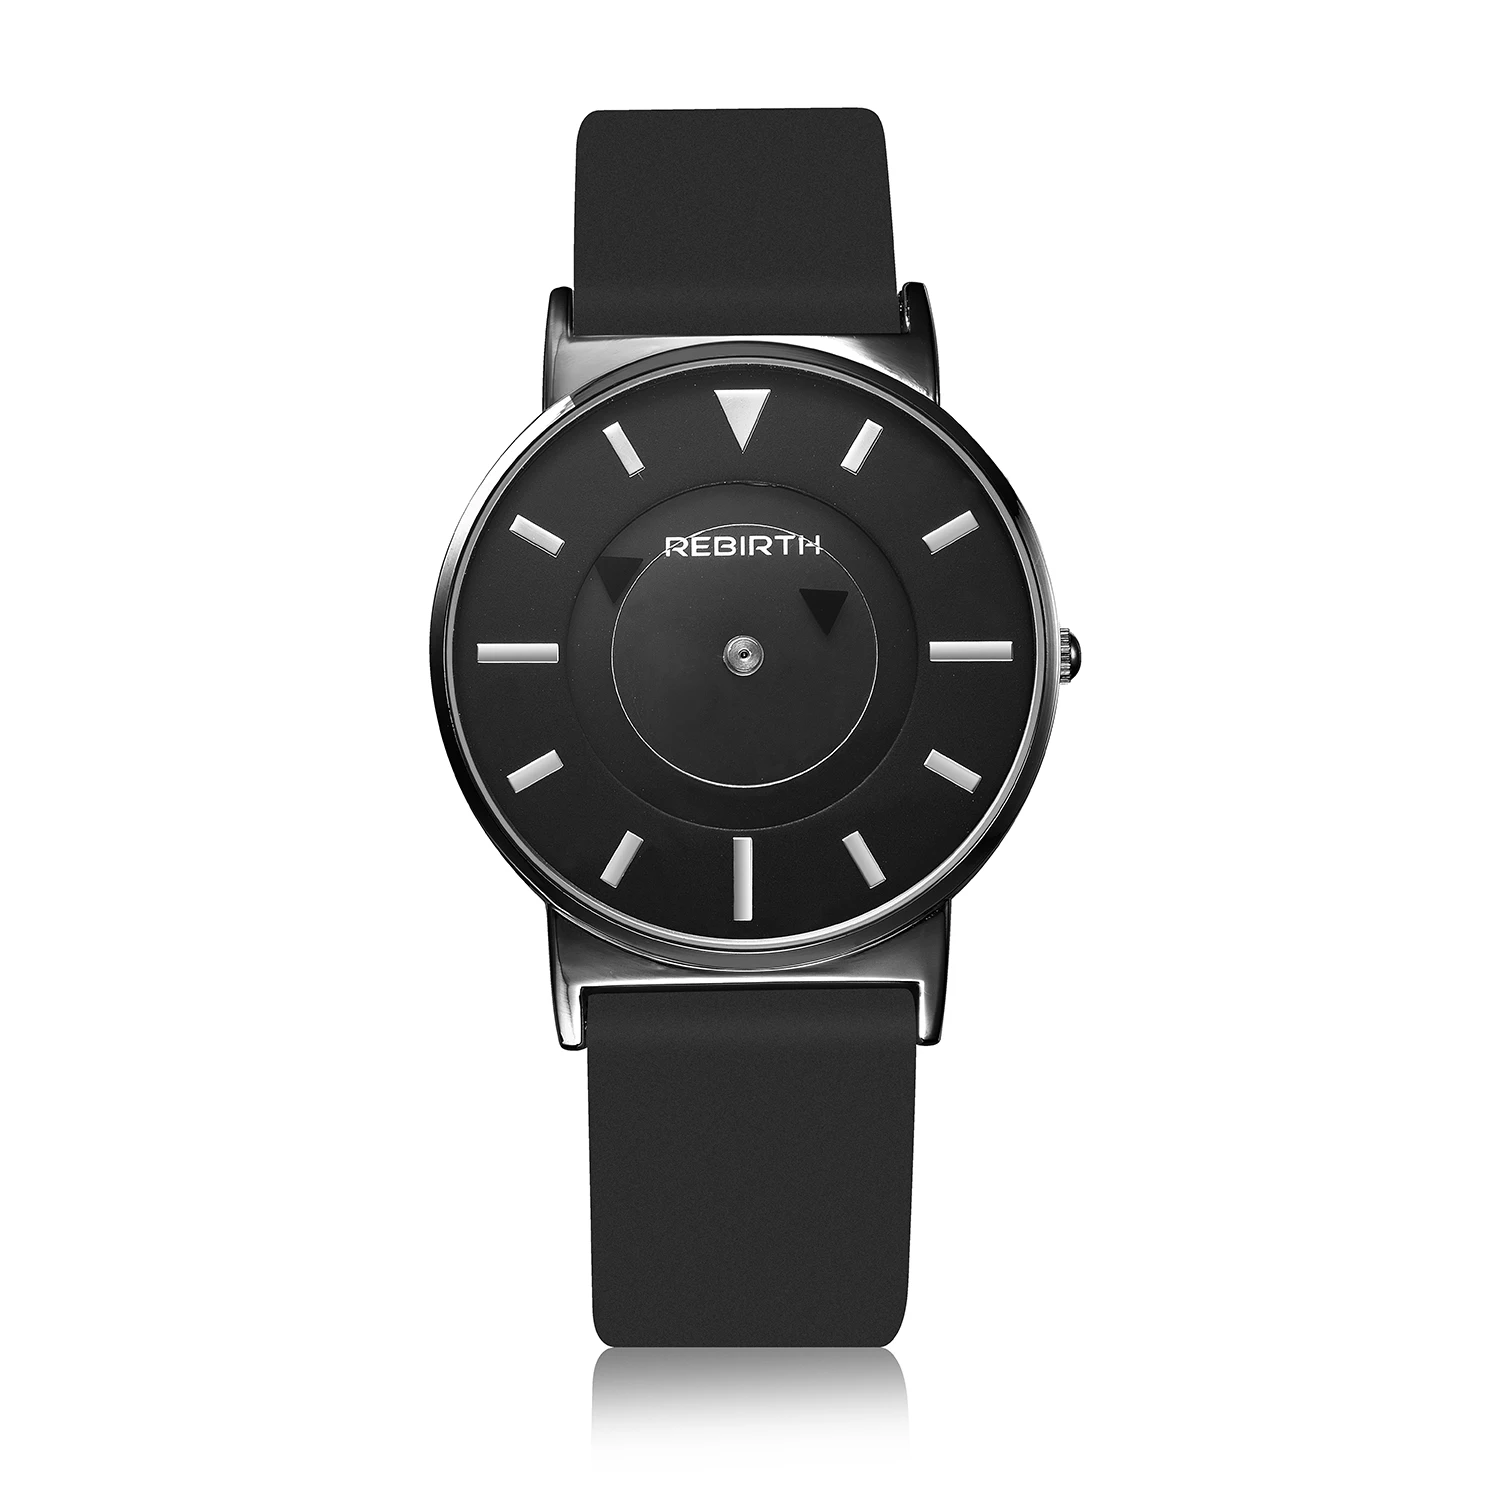 

REBIRTH RE035 cheap black girls quartz watch 2020 Leather band water resist analog display Simple casual hand watch